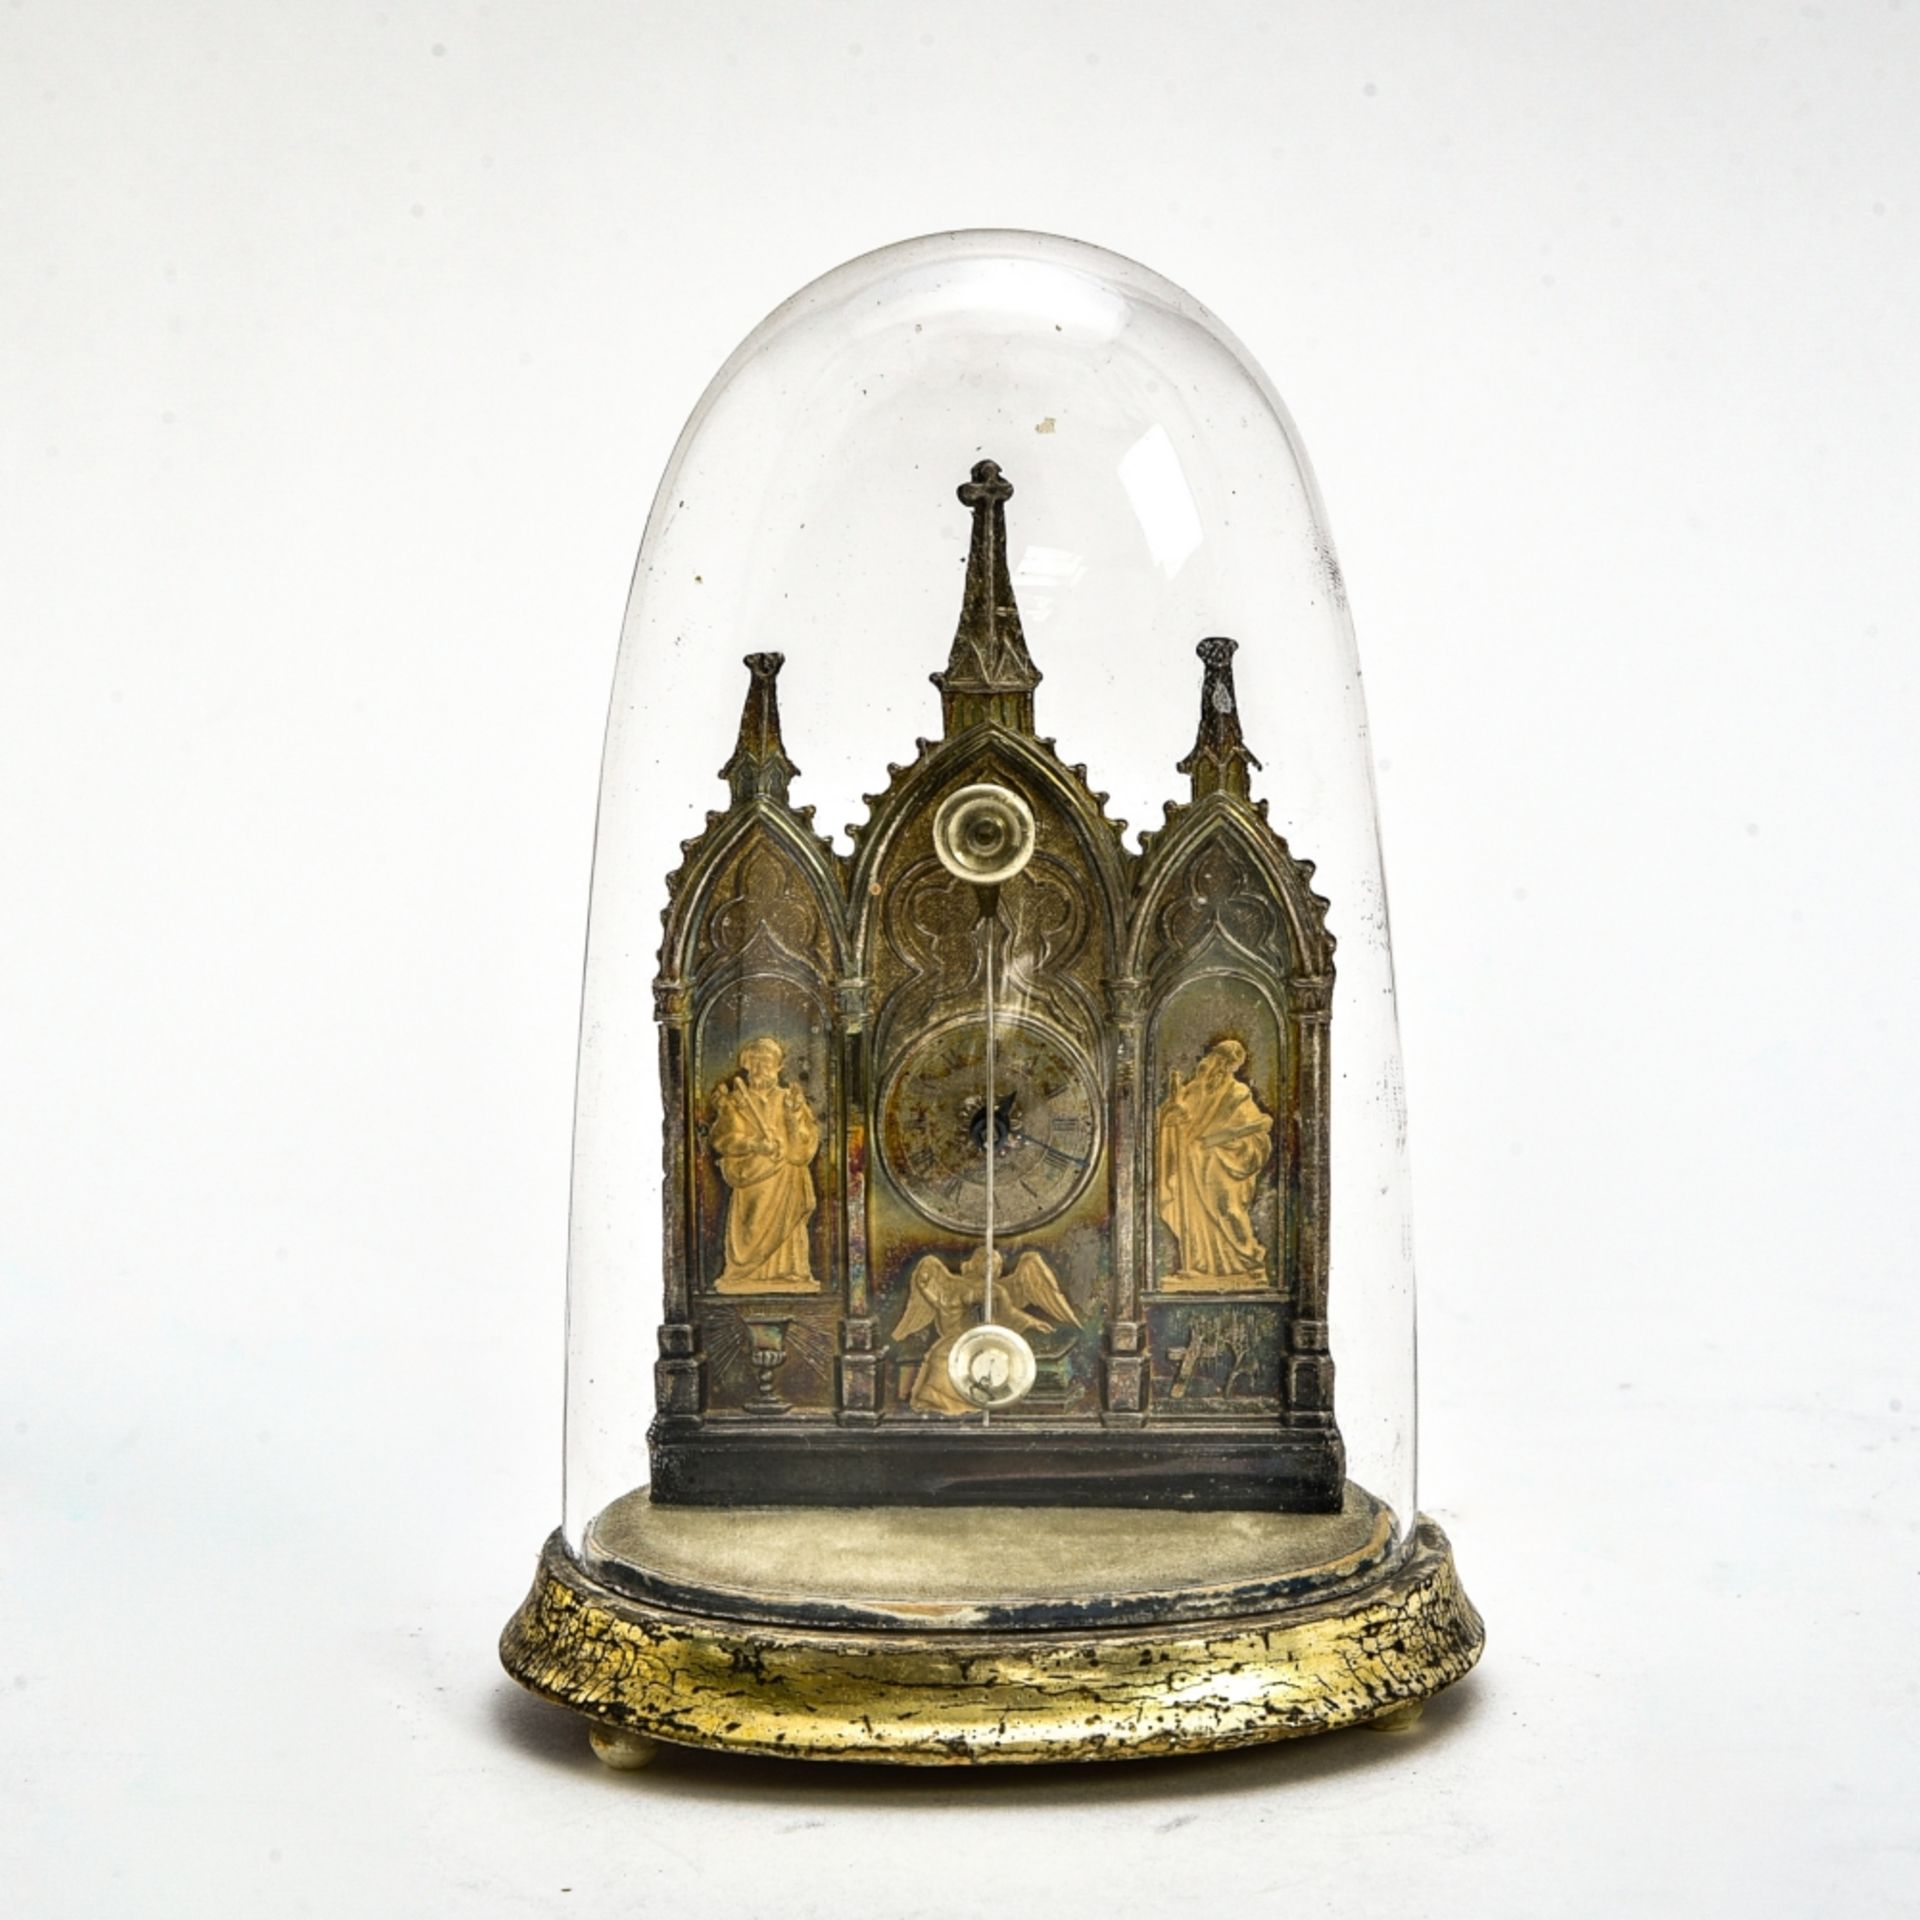 Miniature cathedral clock 19TH CENTURY WORK silver-plated and gilt metal, decorated with St. - Image 3 of 3